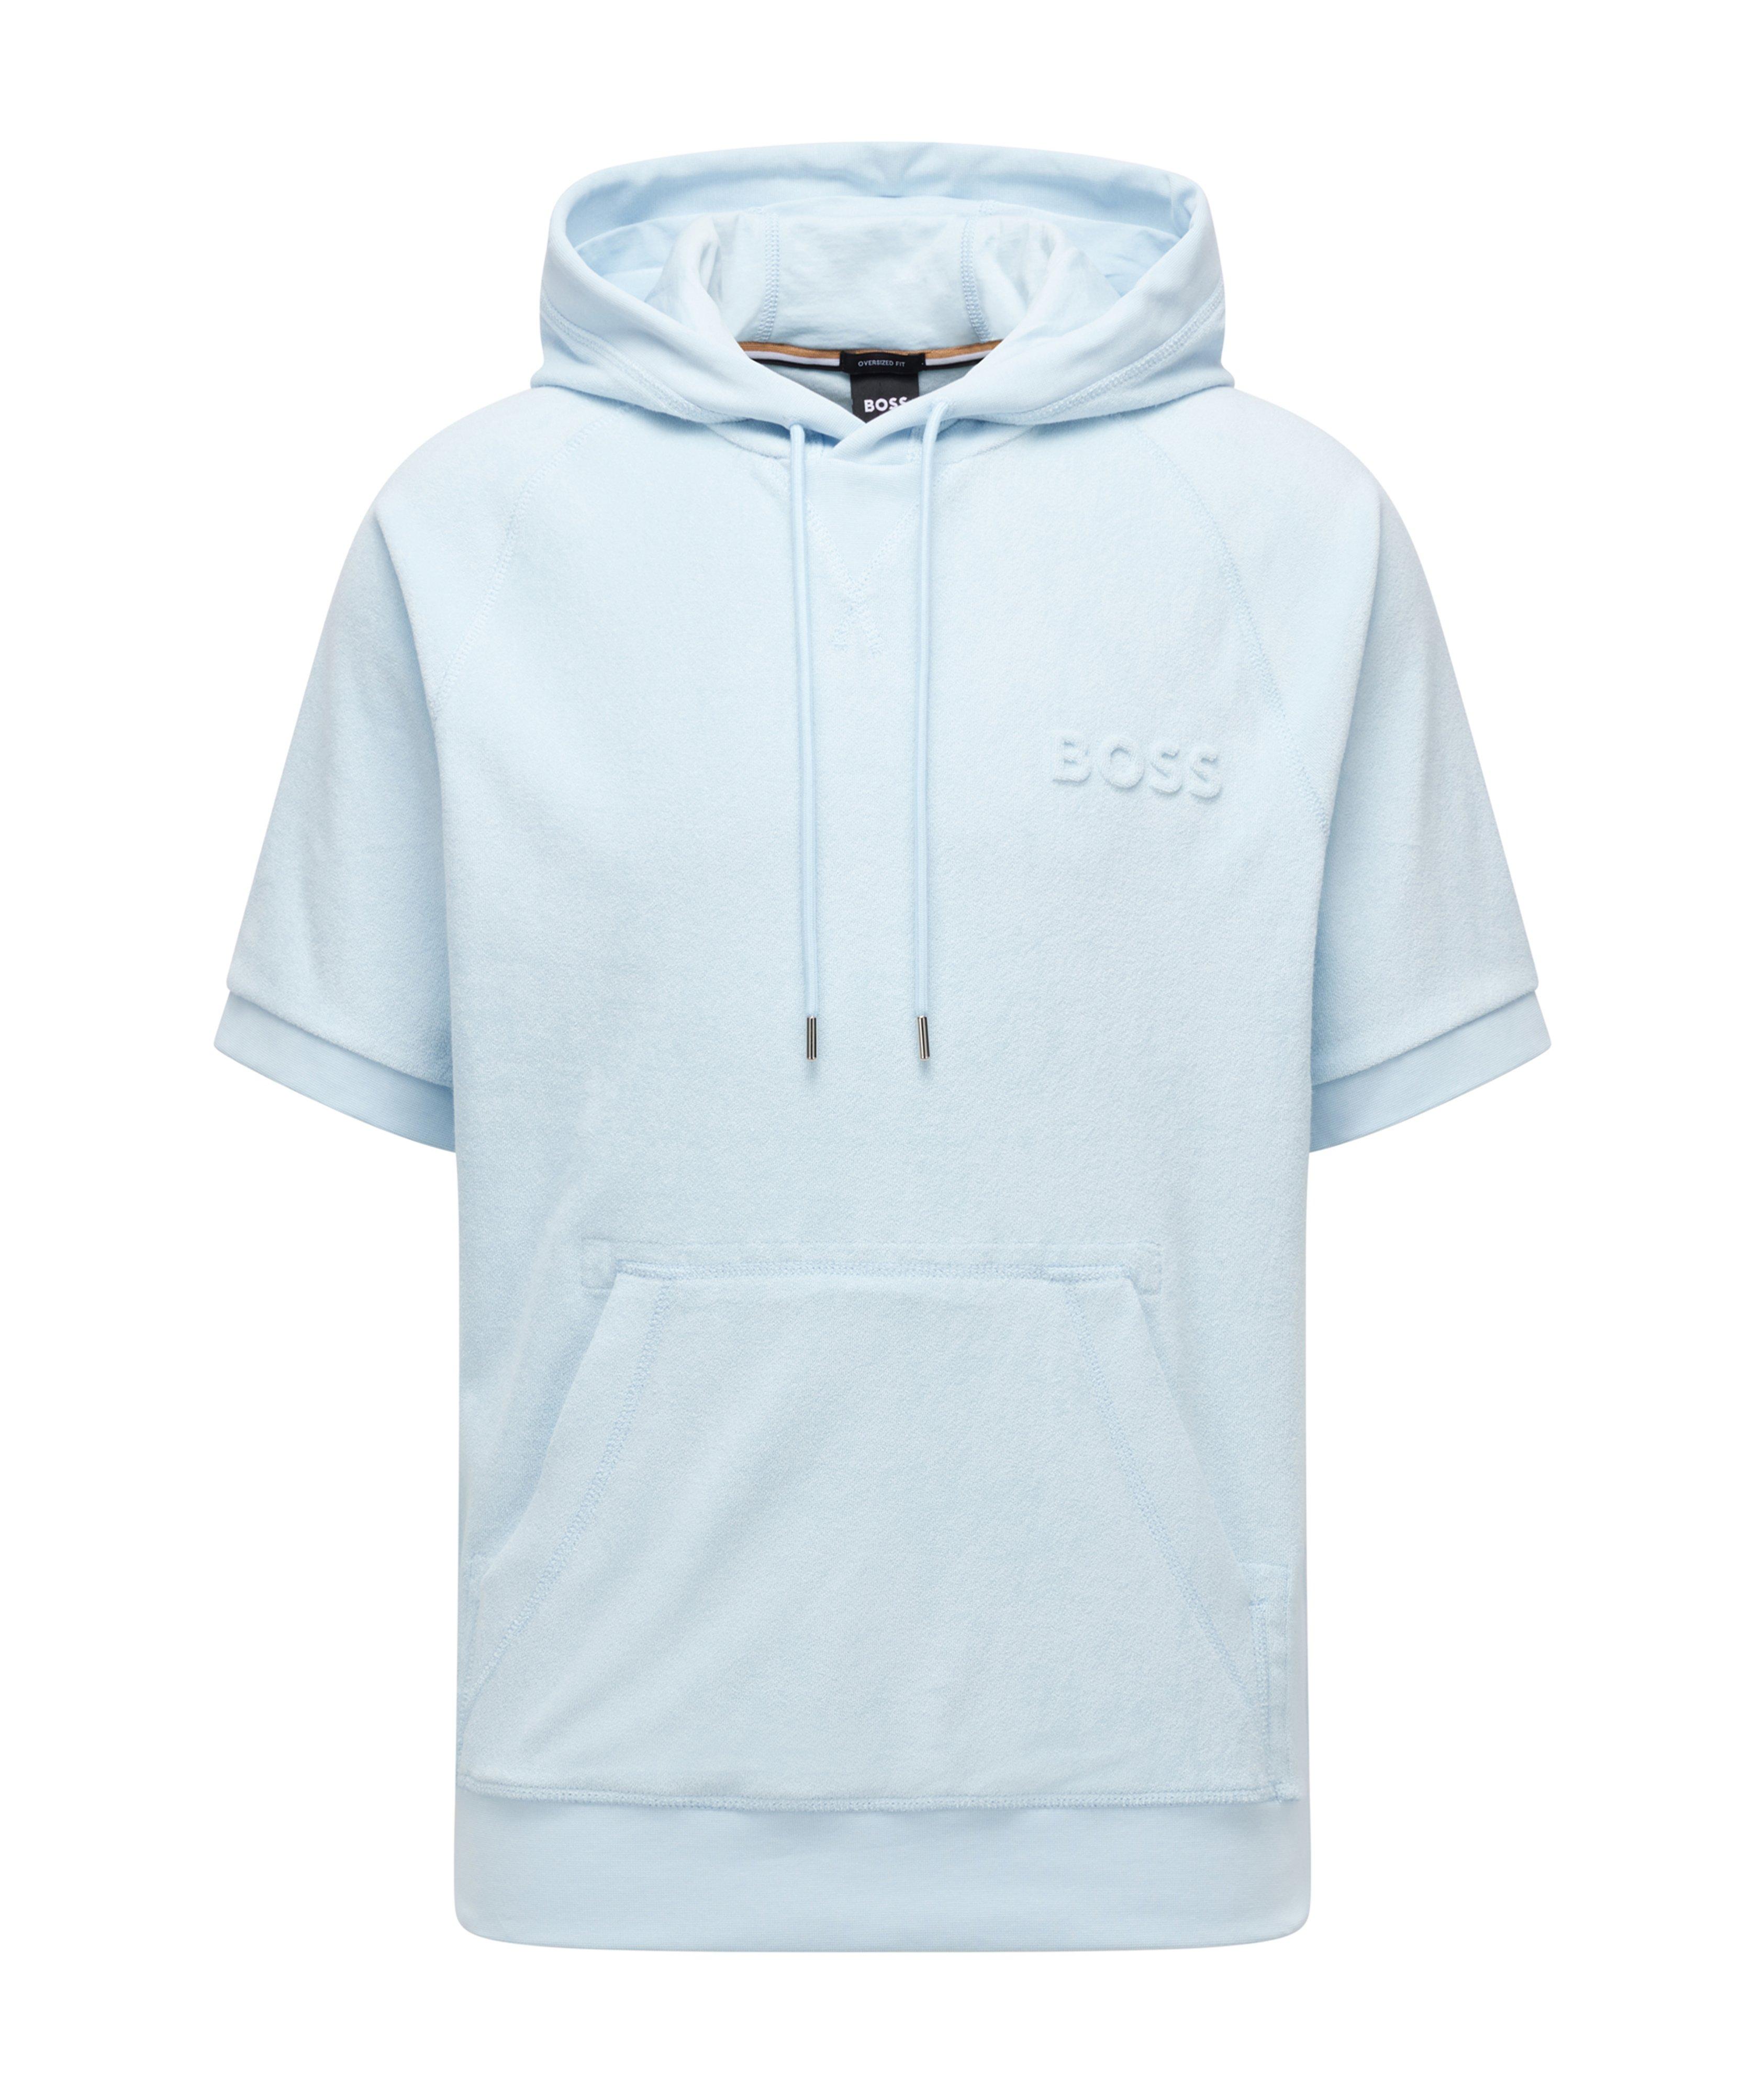 Cotton Terry Short Sleeve Hoodie image 0